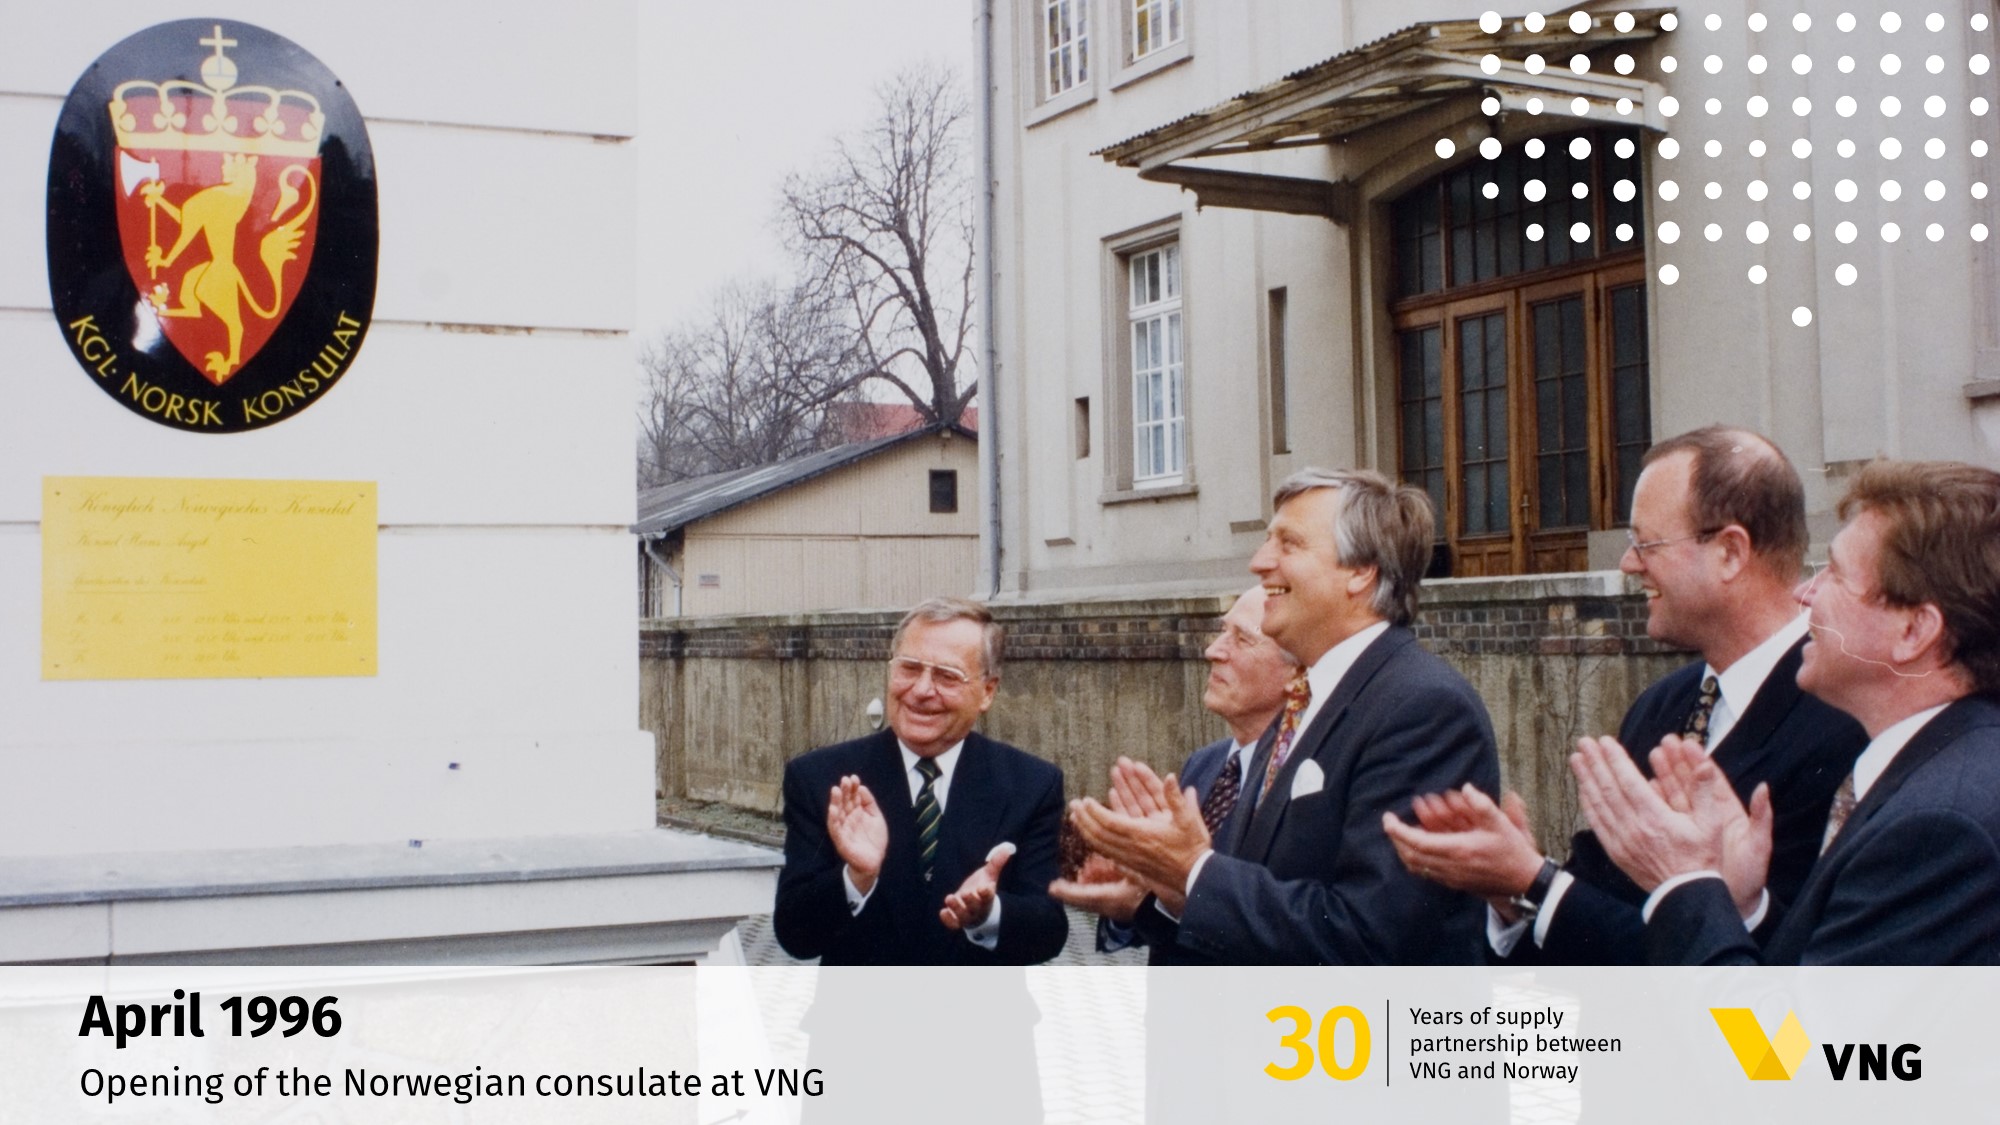 Opening of the Norwegian consulate at VNG in 1996